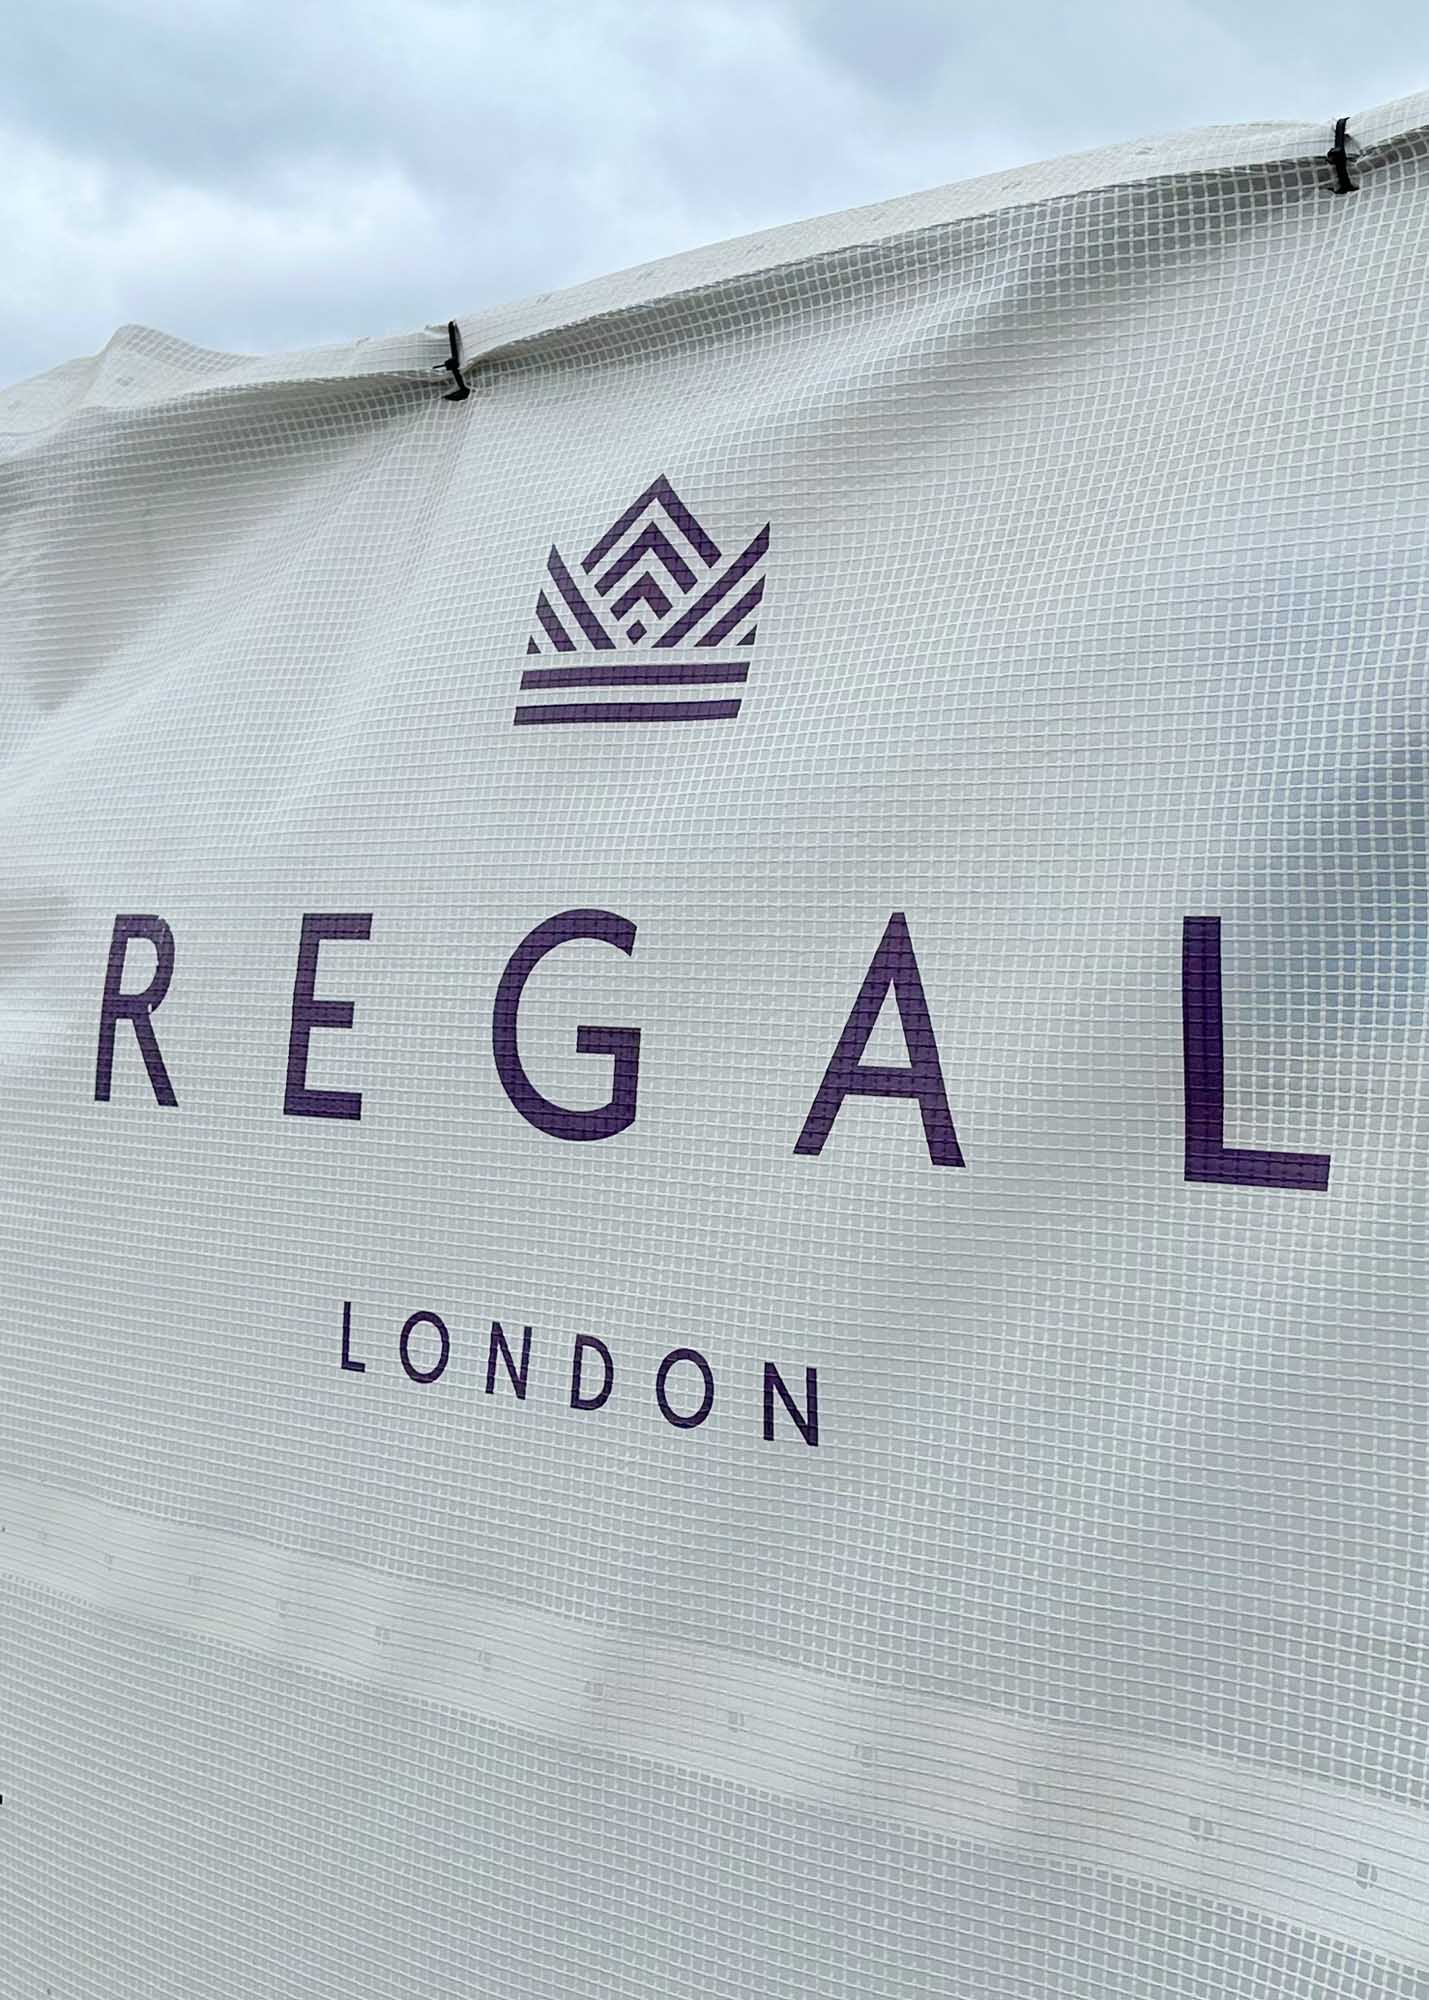 Regal London acquires Great North Leisure Park in Barnet in London N12